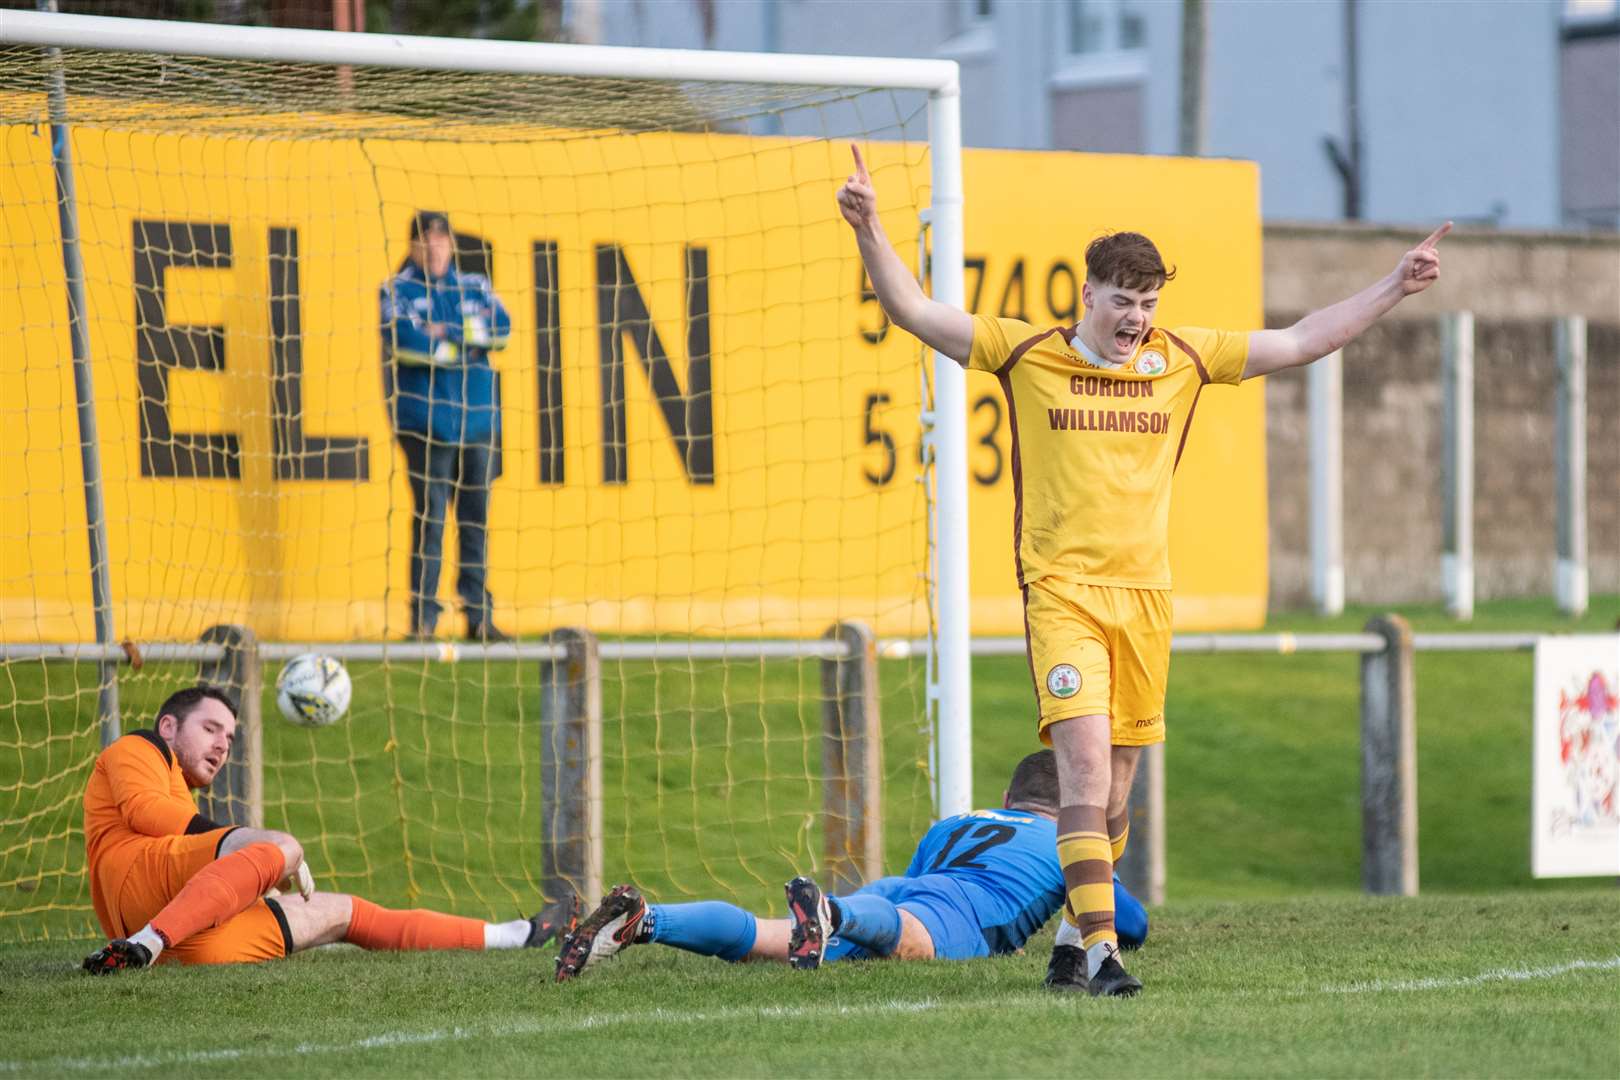 Forres forward Ben Barron celebrates after opening the scoring for the home side...Forres Mechanics FC (8) vs Strathspey Thistle FC (1) - Highland Football League 22/23 - Mosset Park, Forres 07/01/23...Picture: Daniel Forsyth..